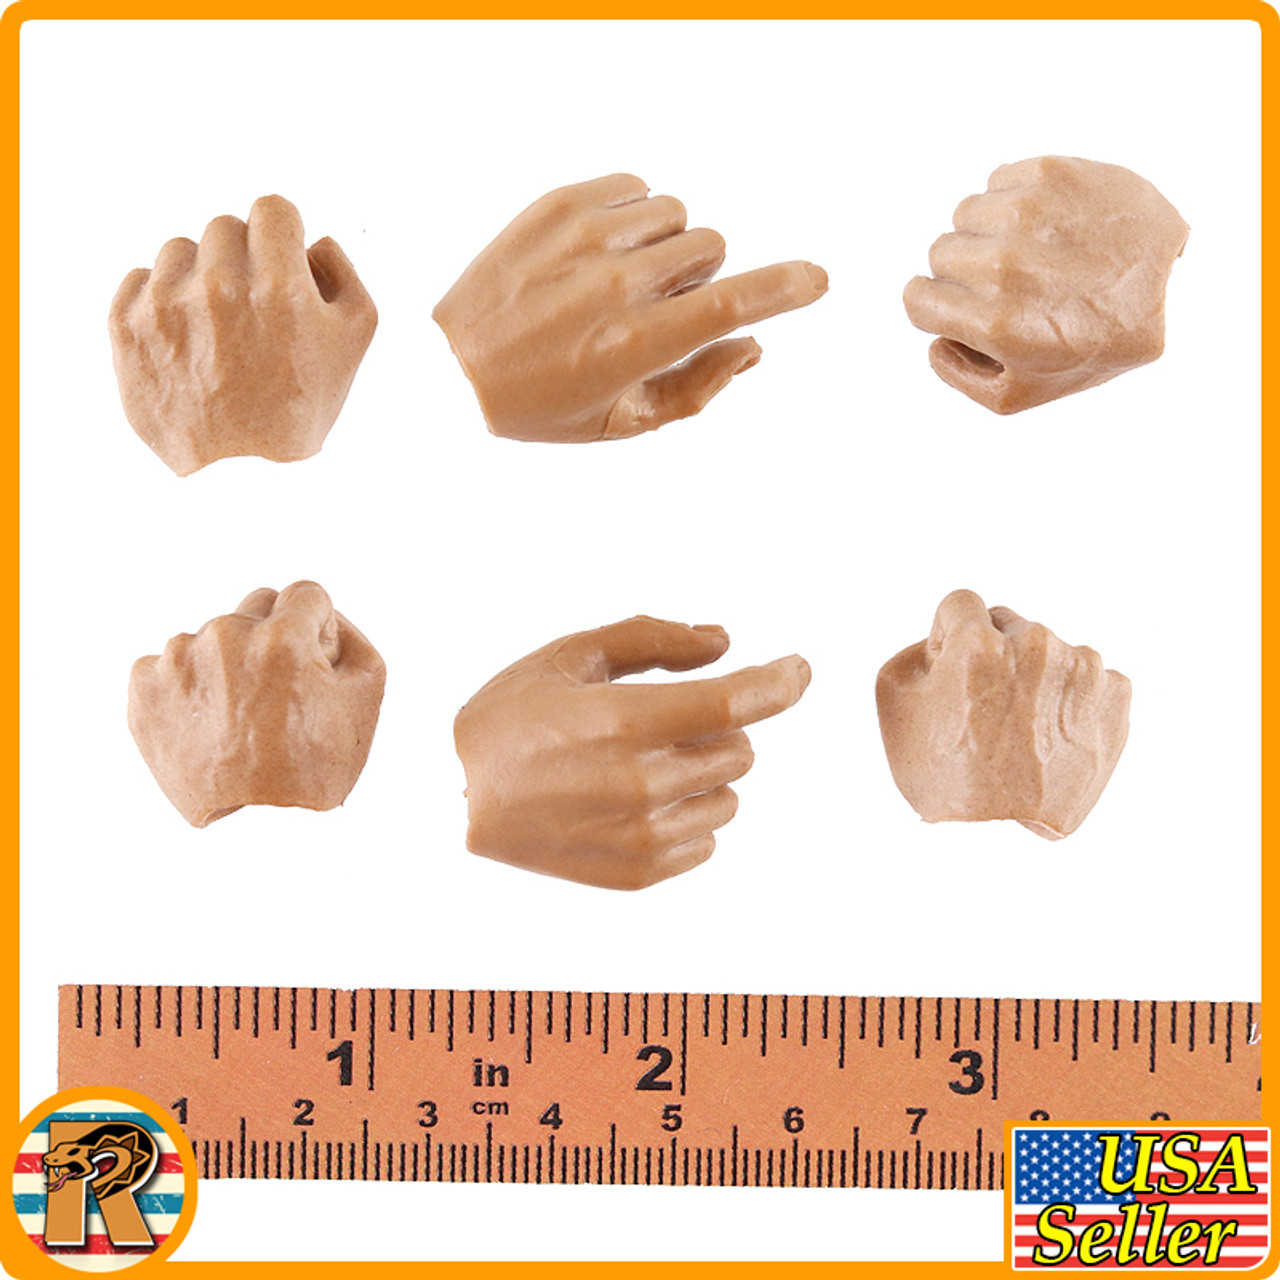 Philippines 1941 - Hands Set - 1/6 Scale -